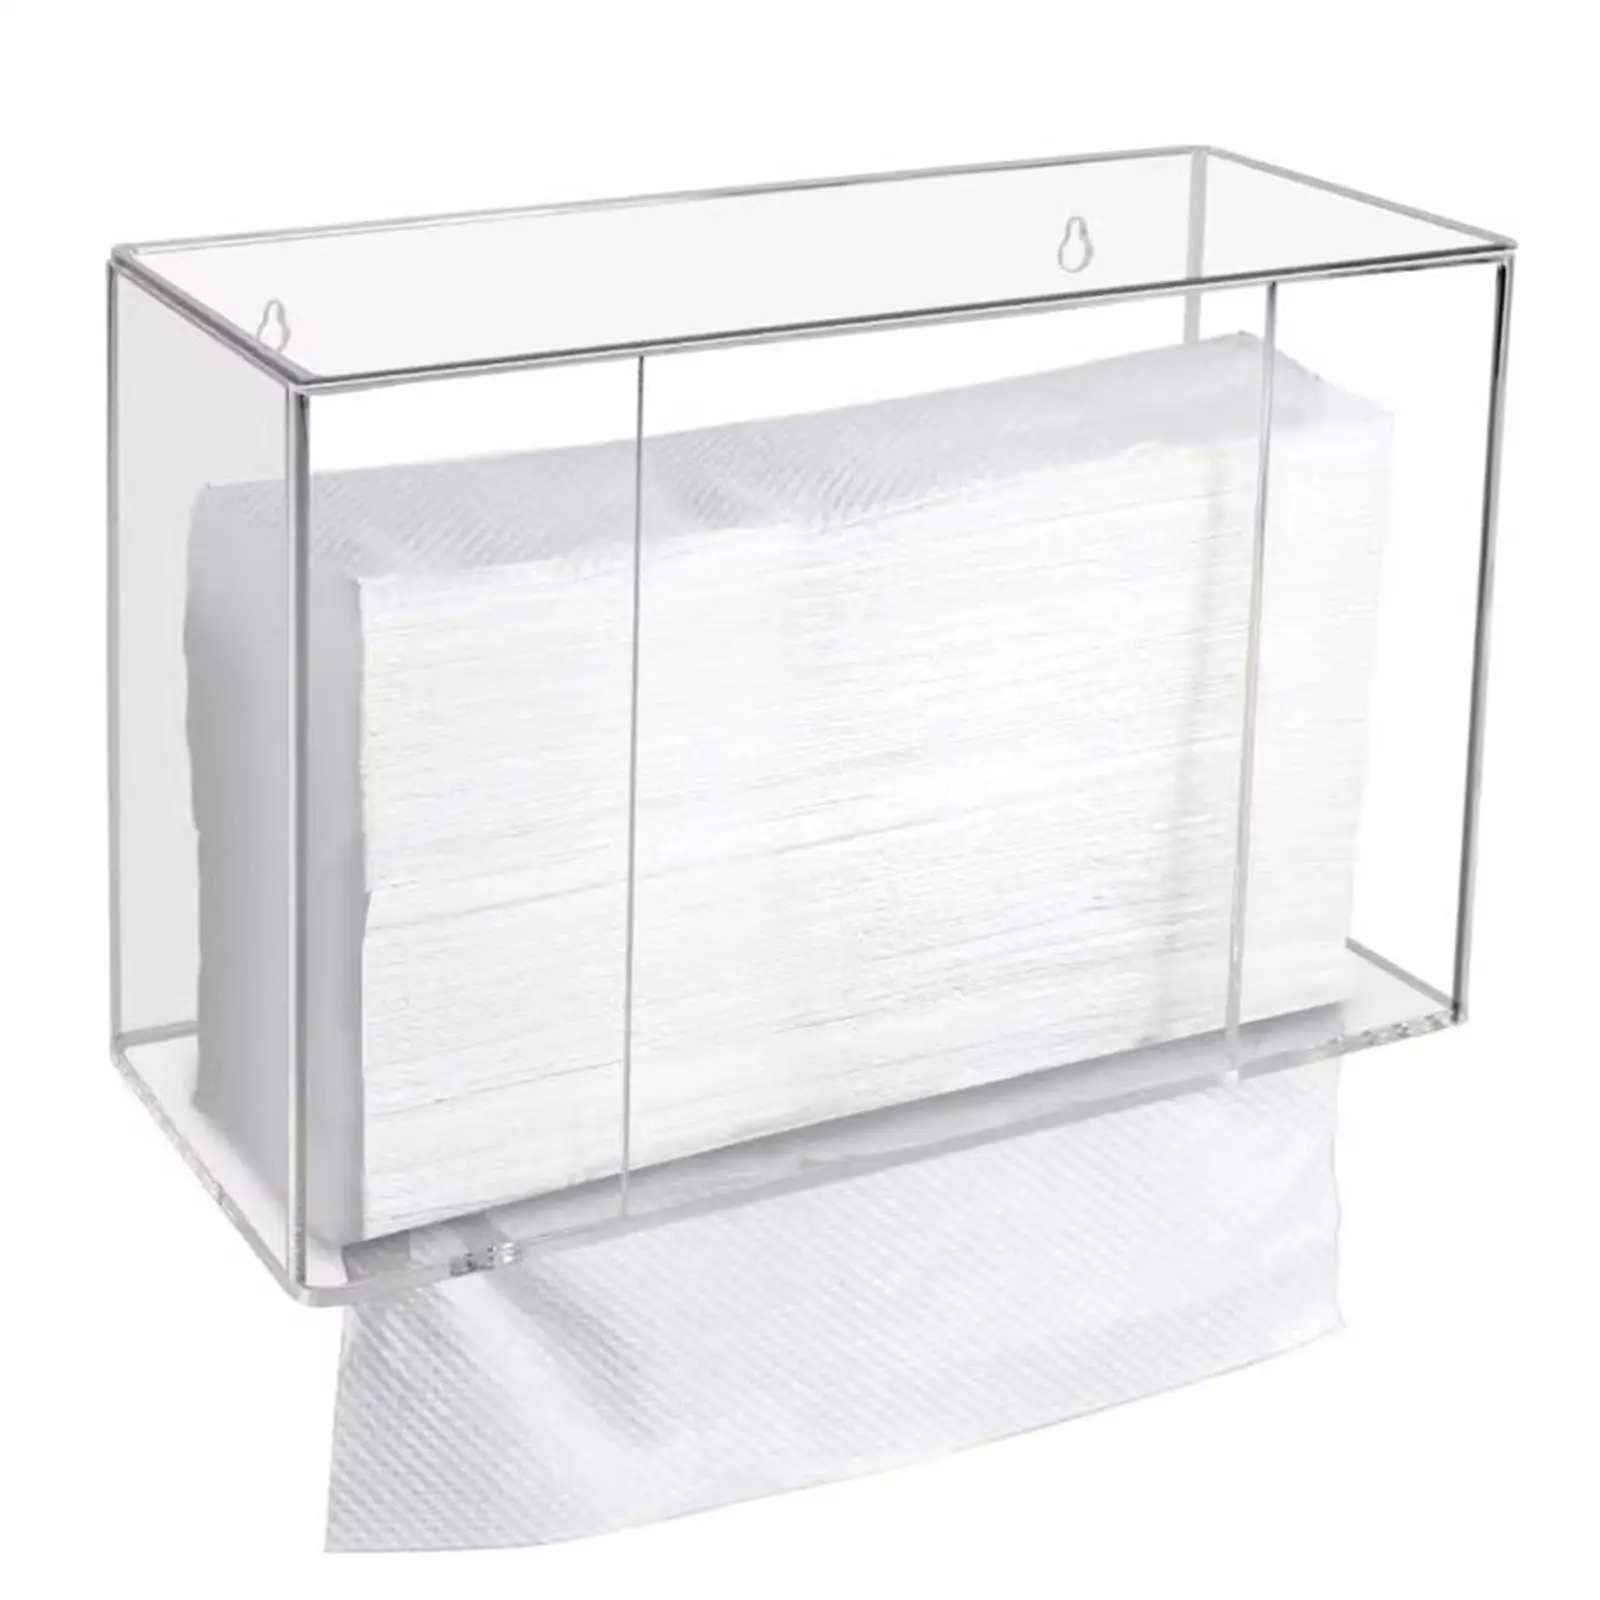 Tissue Holder Wall Mounted Paper Towel Holder Clear Tissue Dispenser Box for Home Decorative Hotel Bathroom kitchen Room